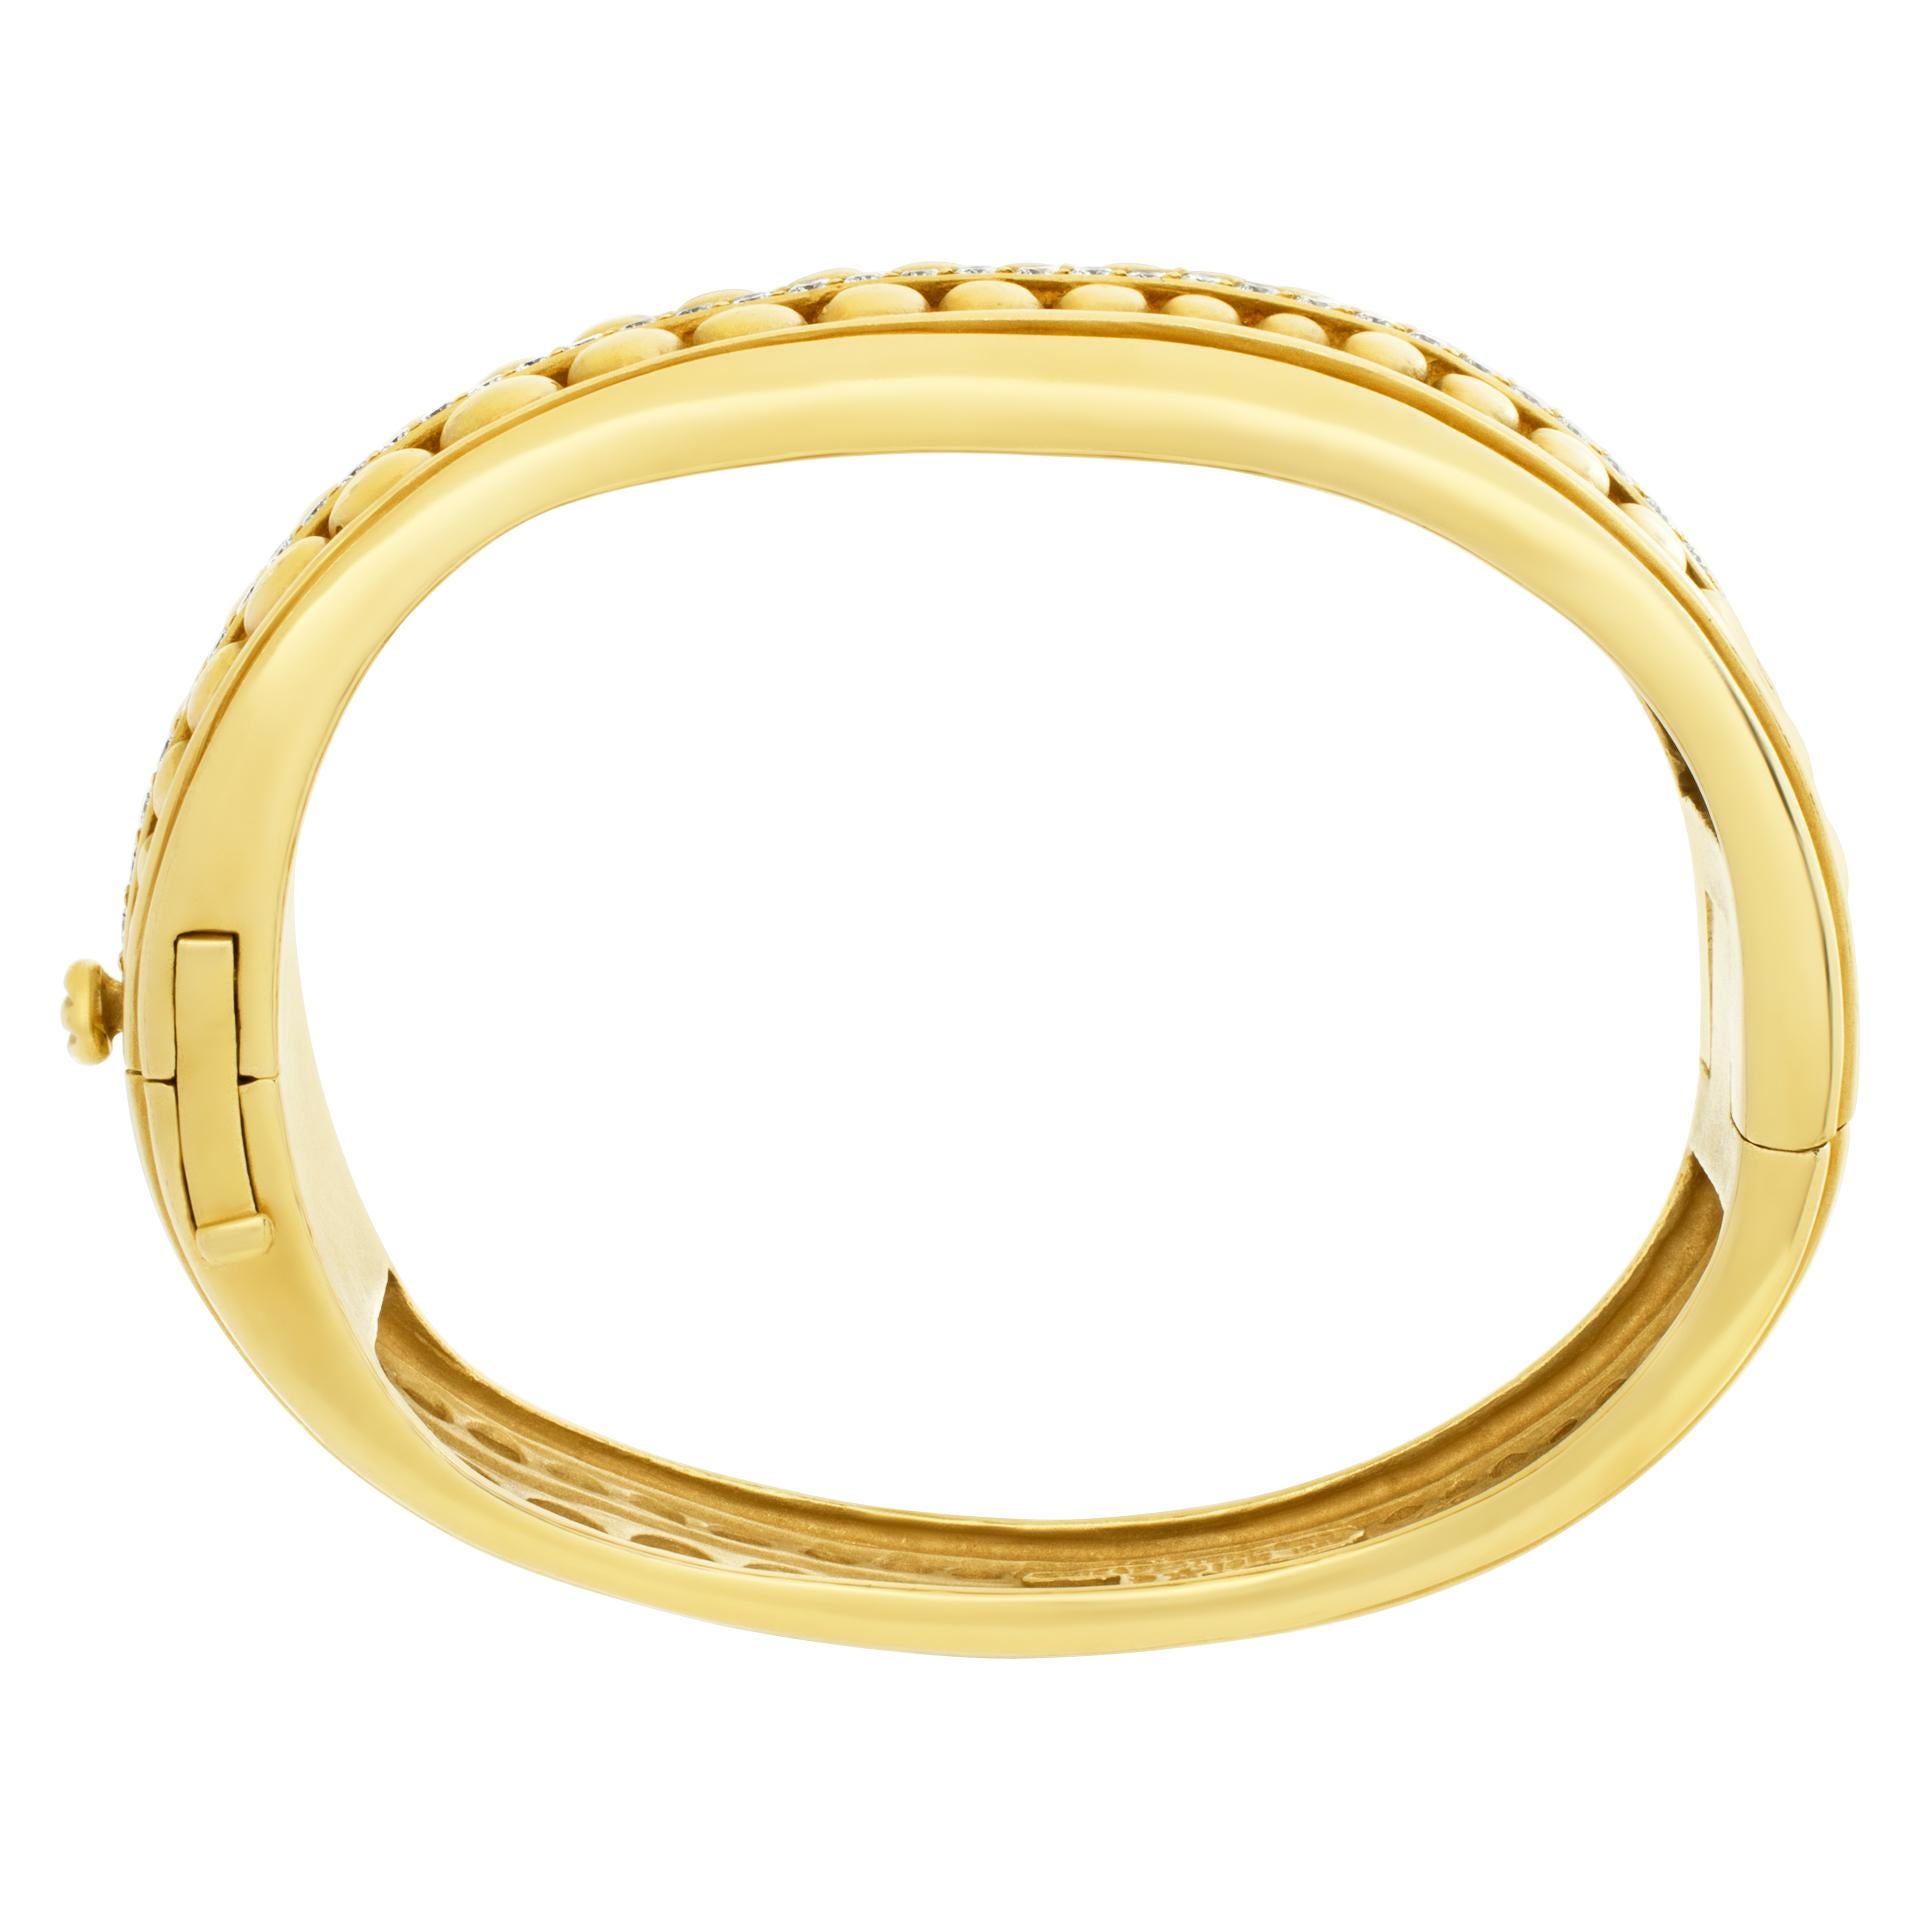 Women's Kieselstein Cord Caviar bangle in 18k with over 2 carats in diamonds. For Sale